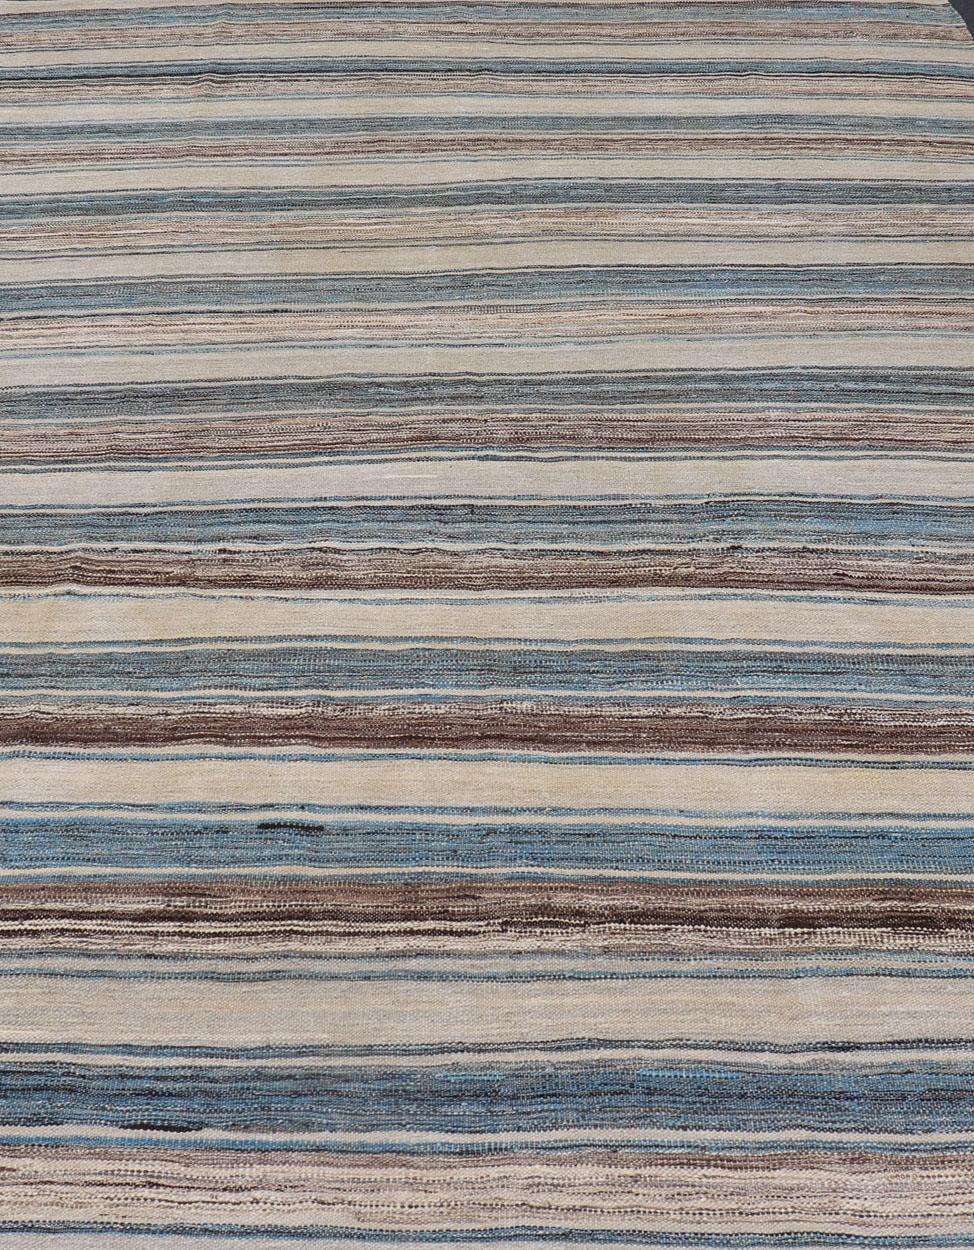 Contemporary Versatile Striped Design and Natural Brown, Cream, and Blue Flat-Weave Kilim For Sale